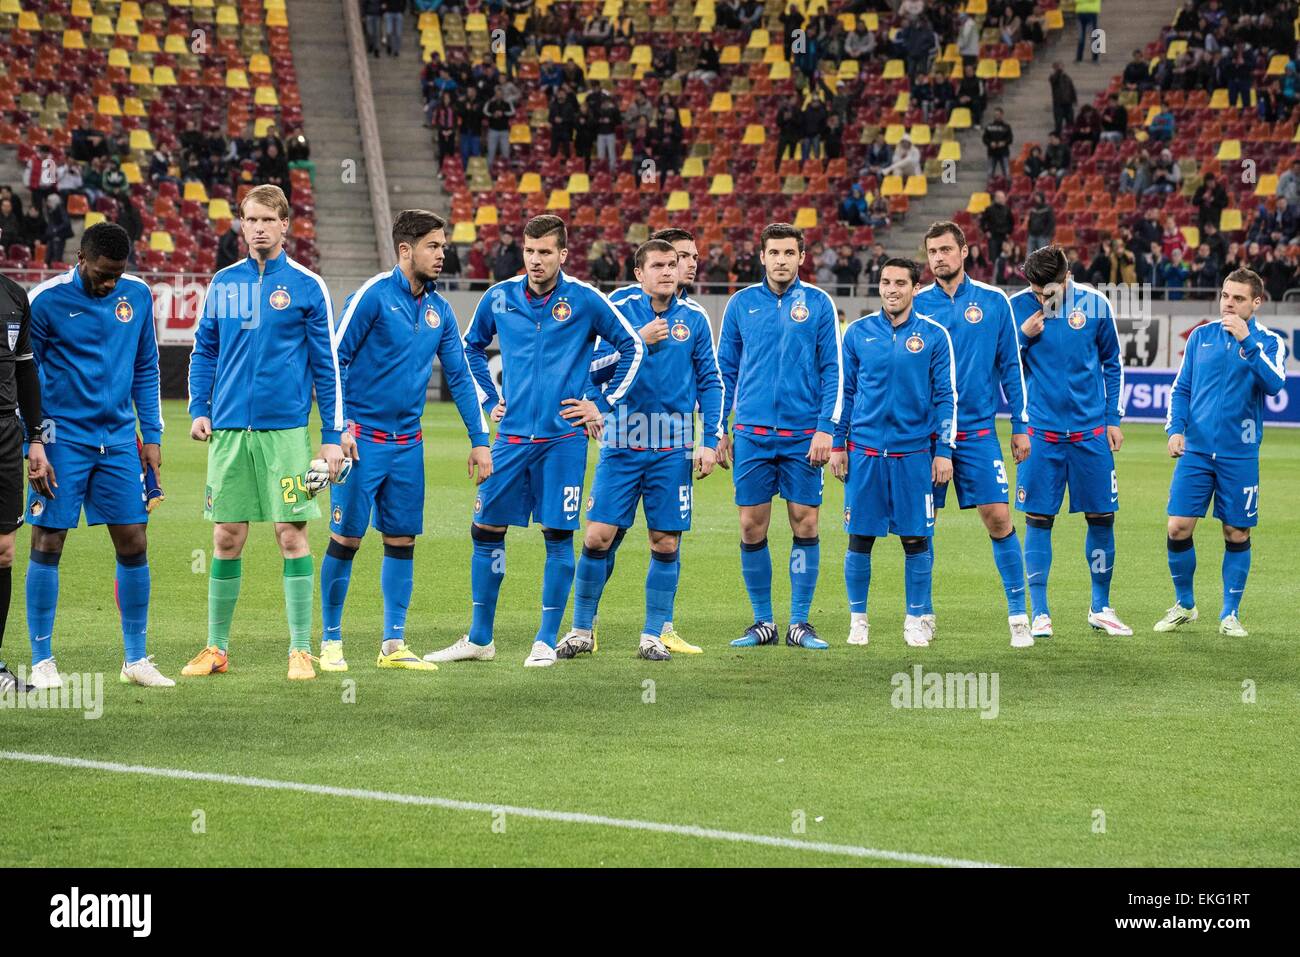 Steaua bucharest bucuresti team hi-res stock photography and images - Alamy